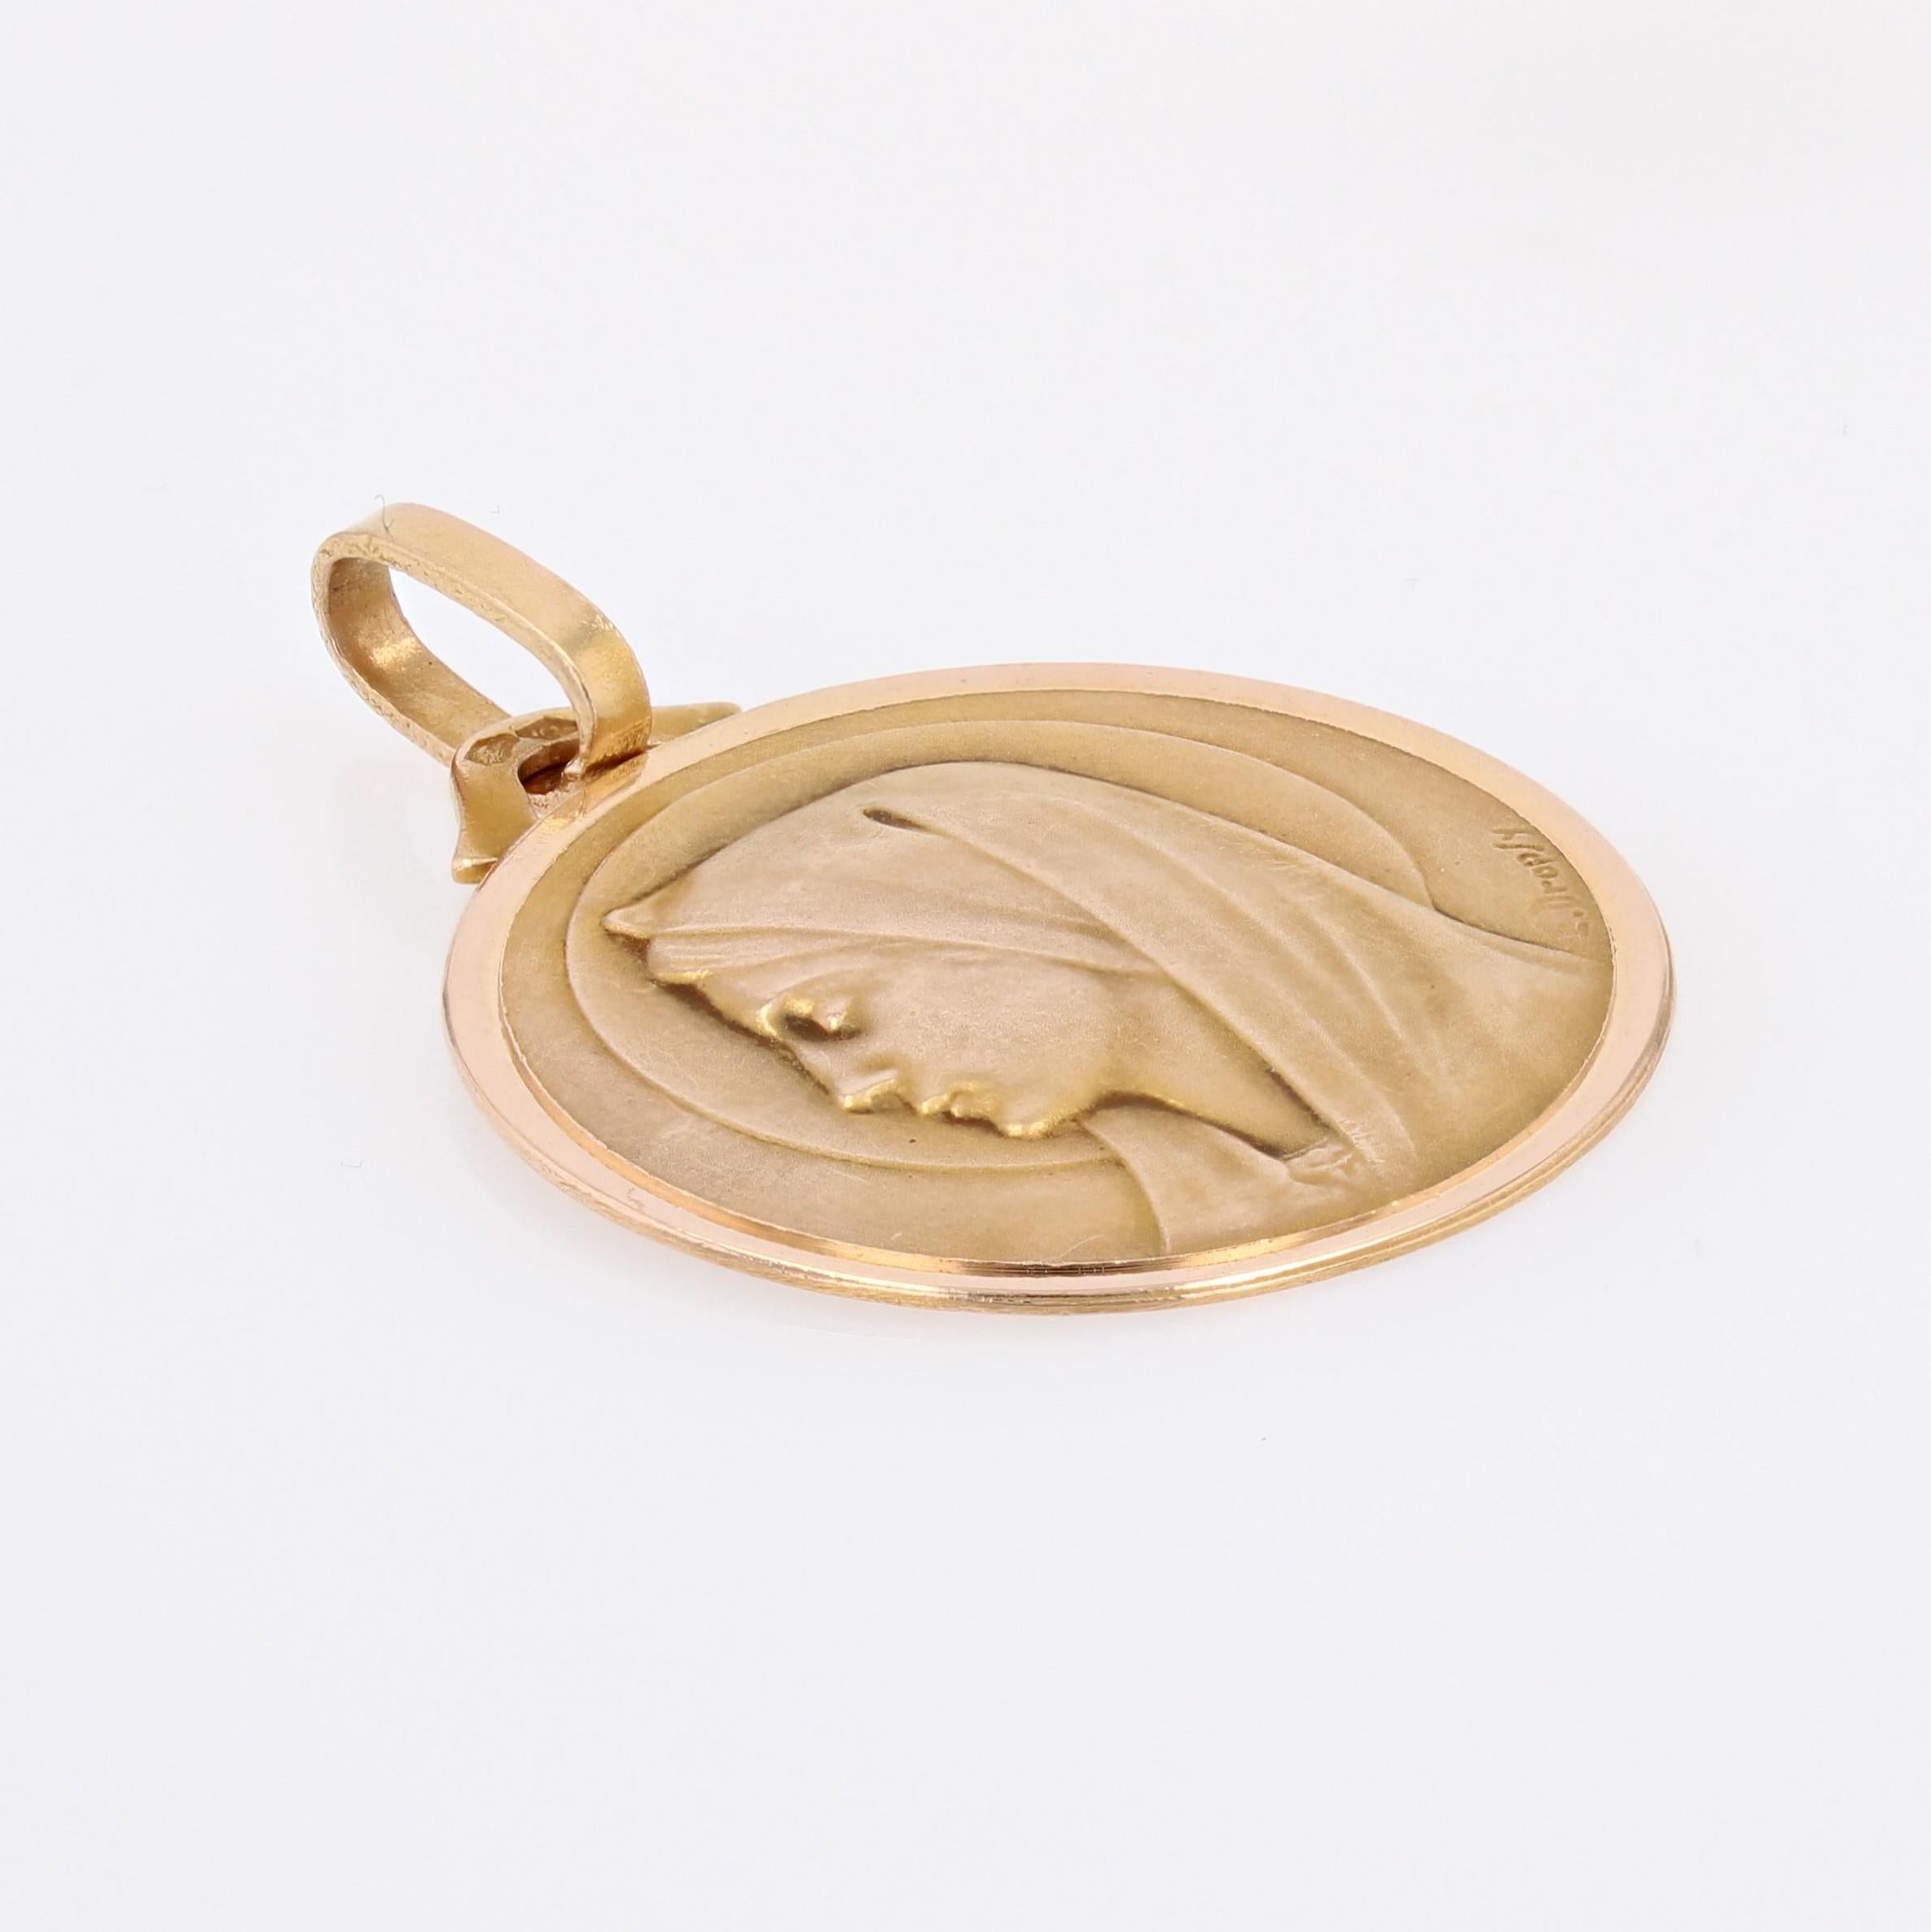 Medal in 18 karat rose gold, eagle head hallmark.
This religious pendant represents the profile of the Virgin Mary edged with smooth rose gold.
The back is engraved : 